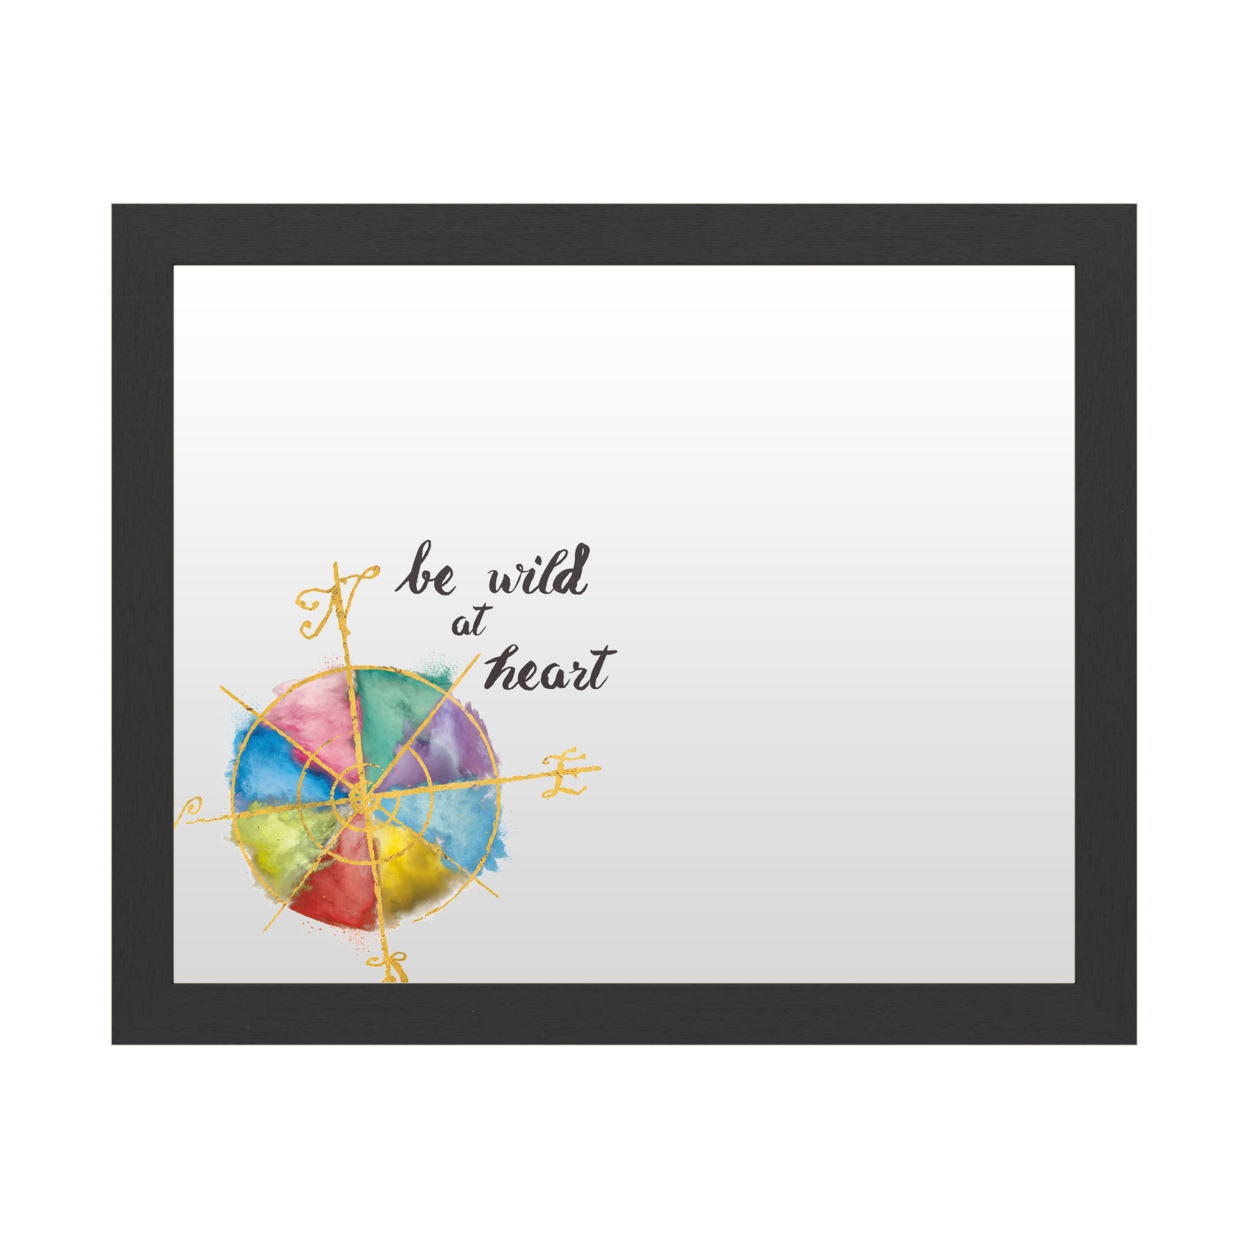 Dry Erase 16 X 20 Marker Board With Printed Artwork - Jess Aiken Colorful World III White Board - Ready To Hang